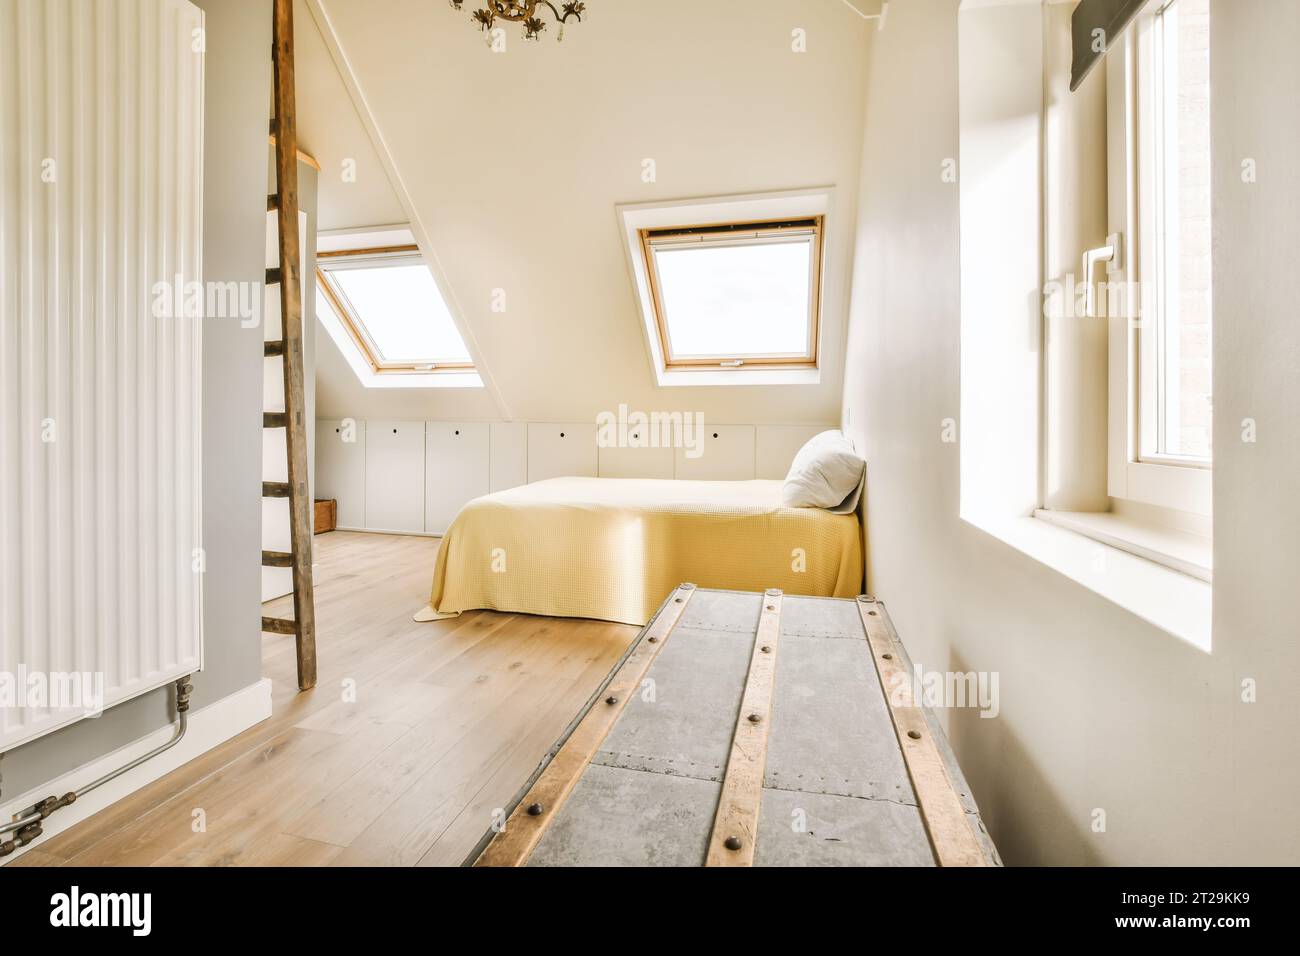 https://c8.alamy.com/comp/2T29KK9/interior-of-attic-bedroom-with-yellow-cozy-bed-and-metallic-treasure-box-by-white-walls-and-windows-in-modern-house-2T29KK9.jpg